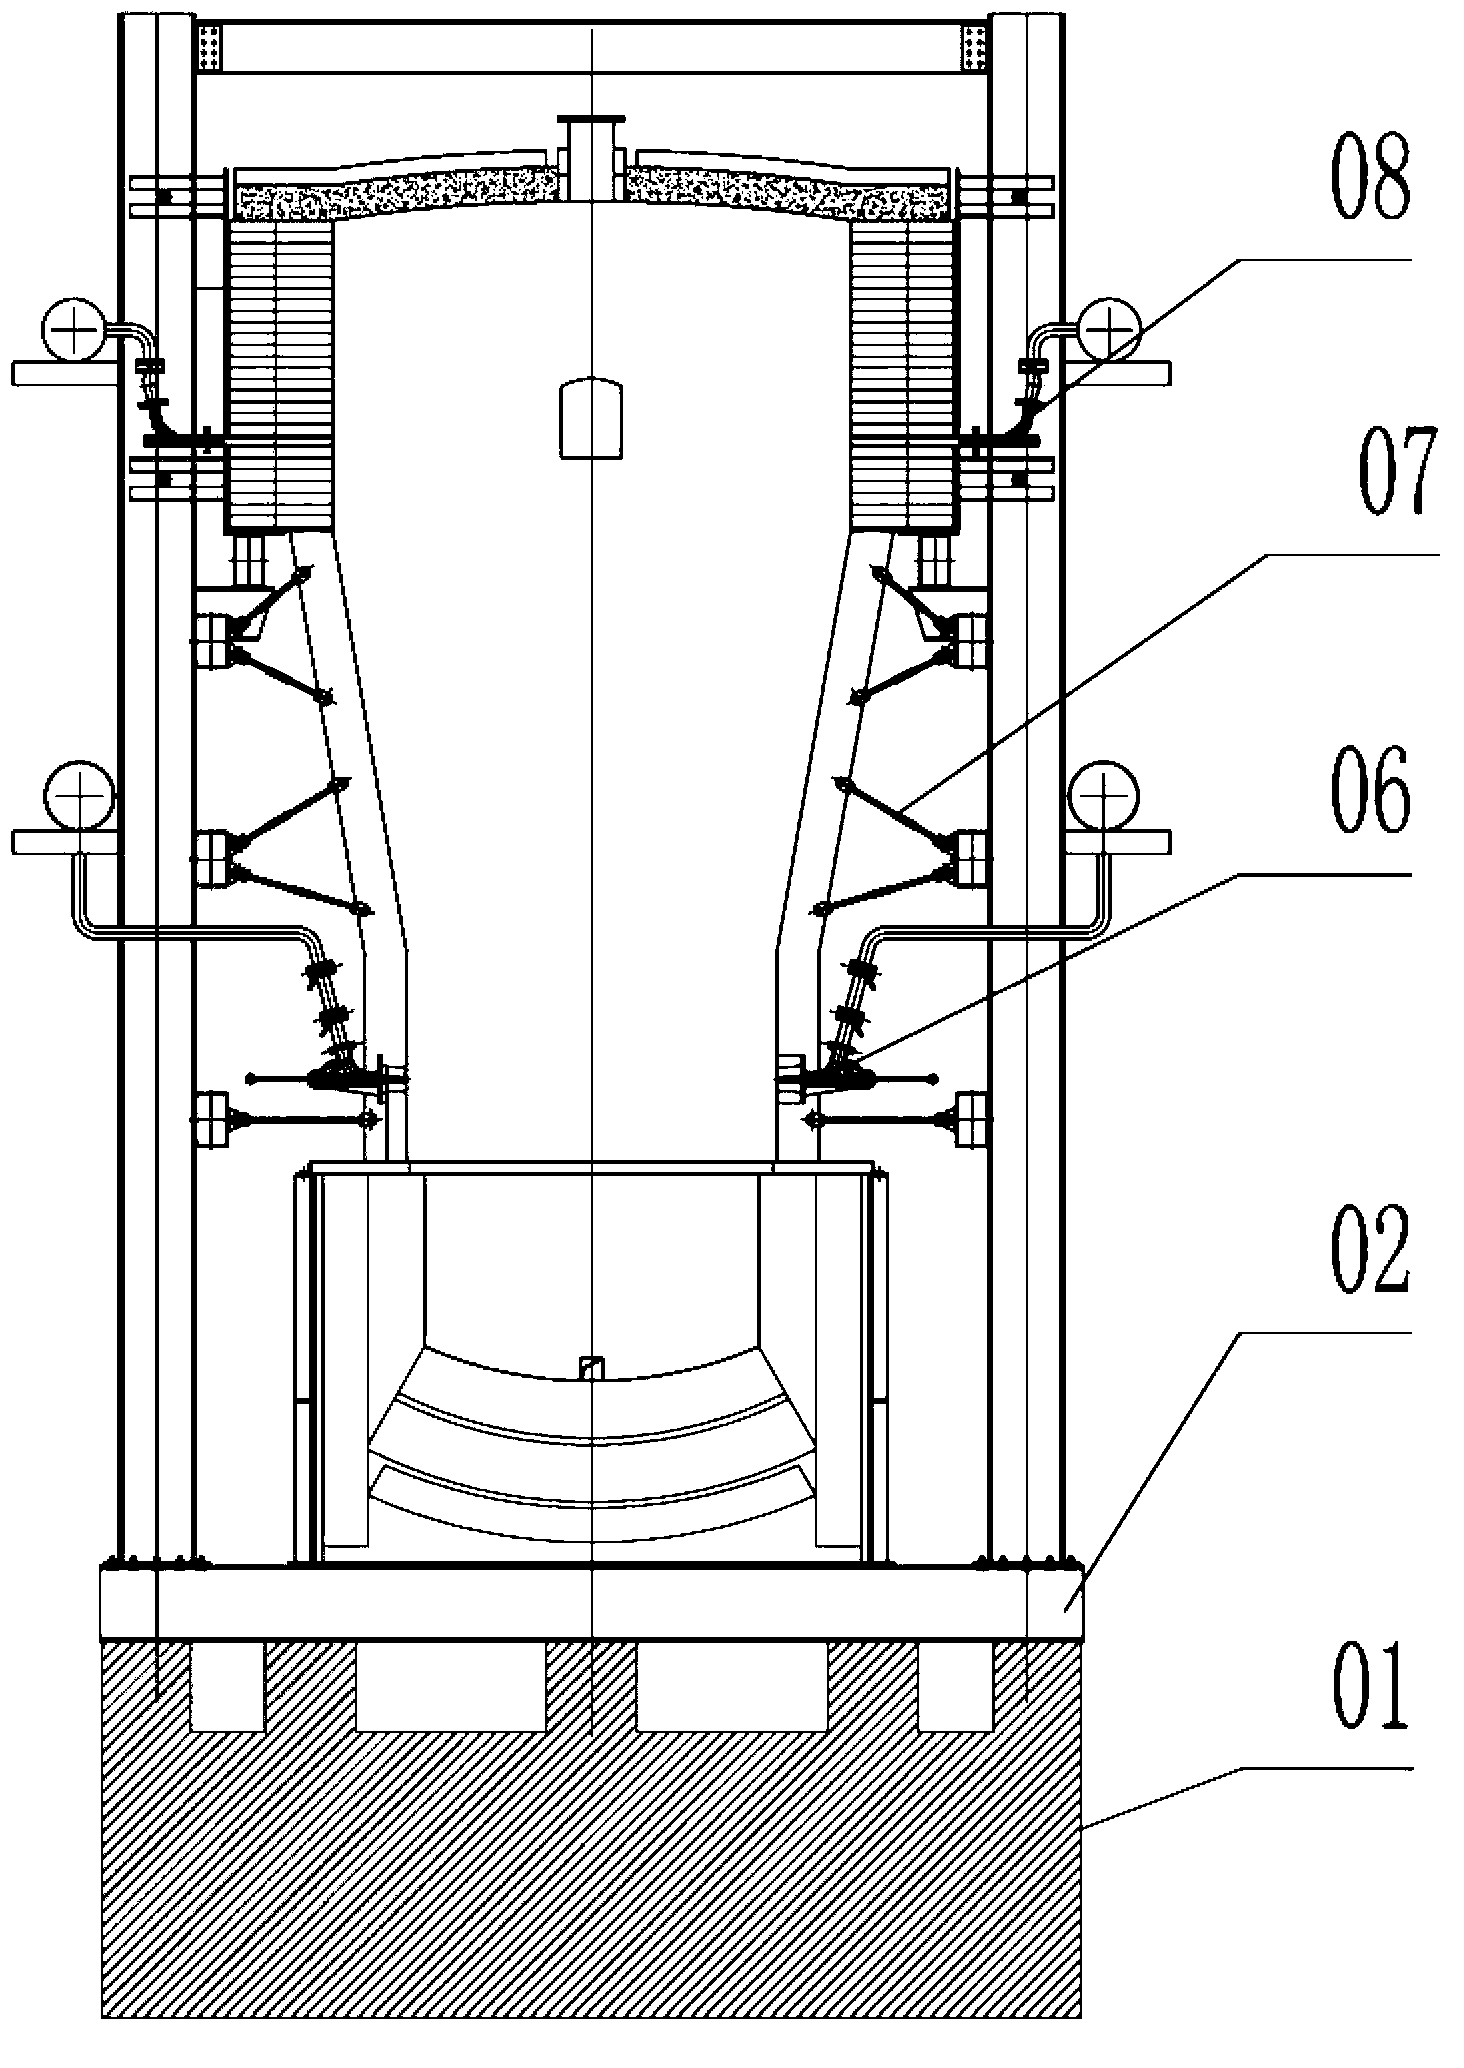 Oxygen-enriched side-blown smelting furnace for complicated and unworkable gold concentrate